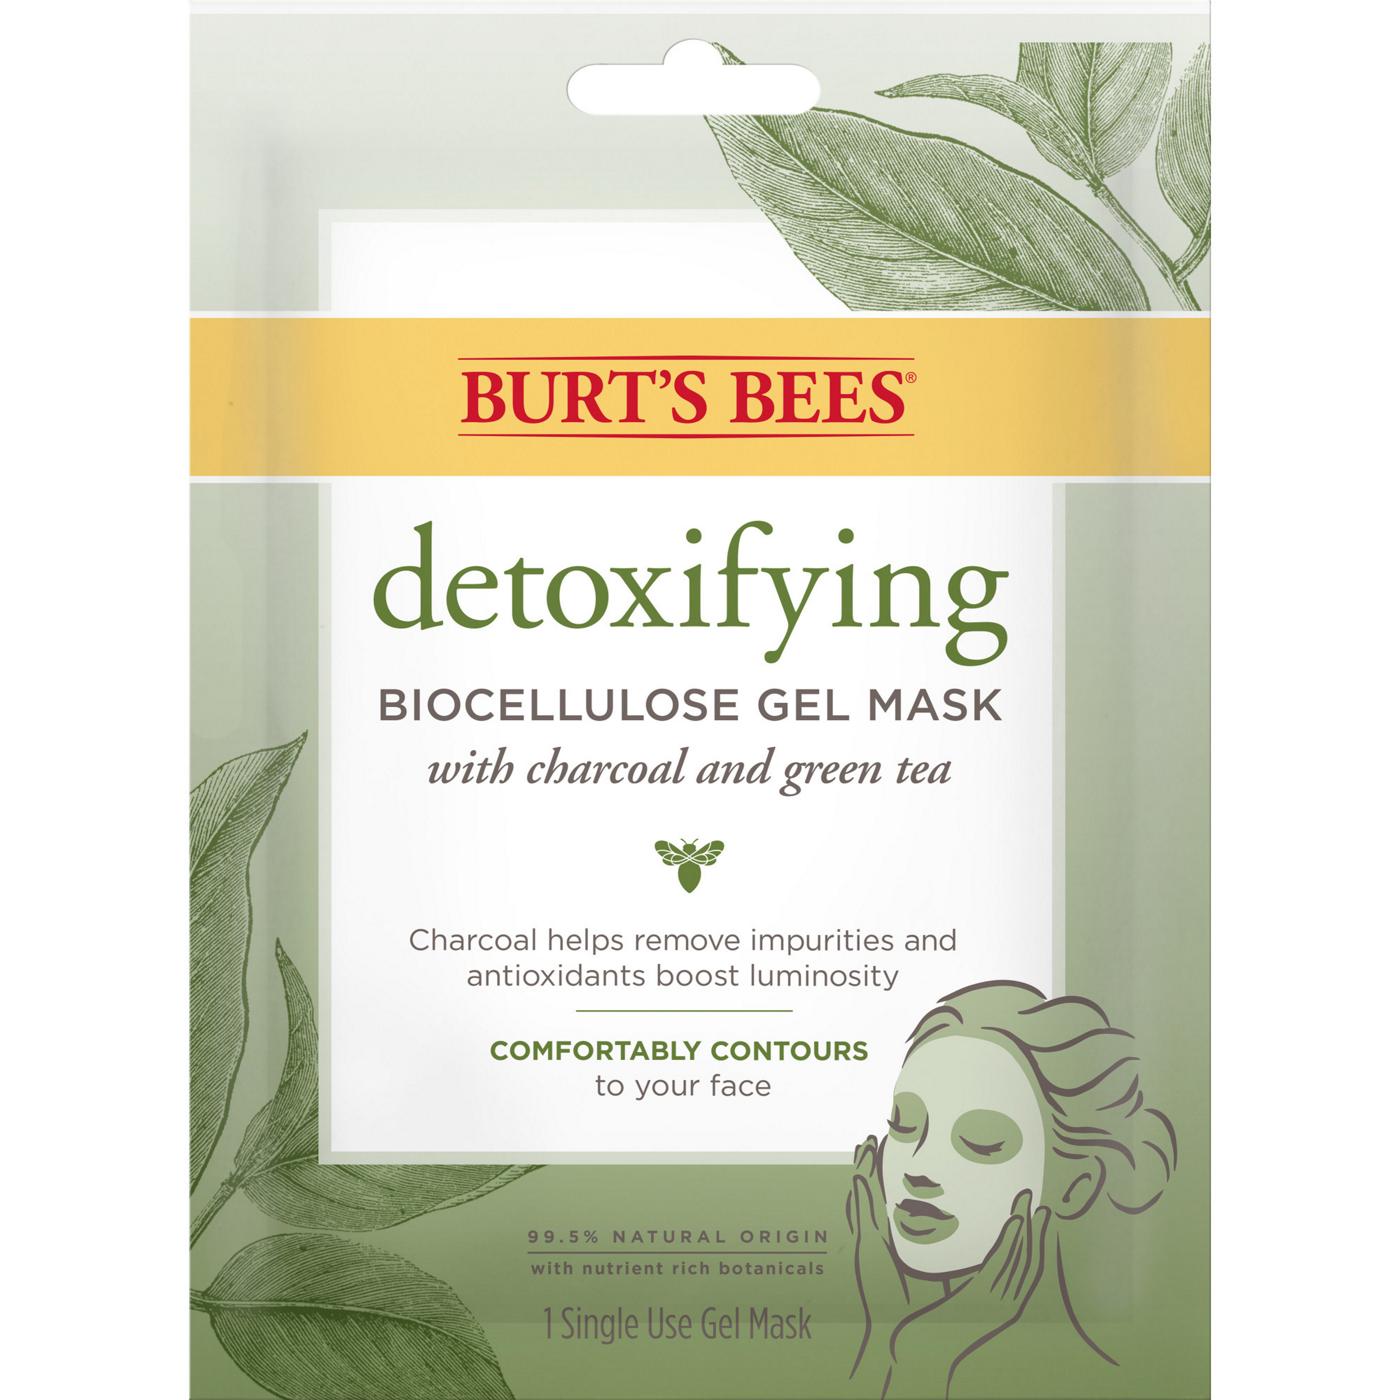 Burt's Bees Detoxifying Biocellulose Gel Mask with Charcoal and Green Tea; image 1 of 6